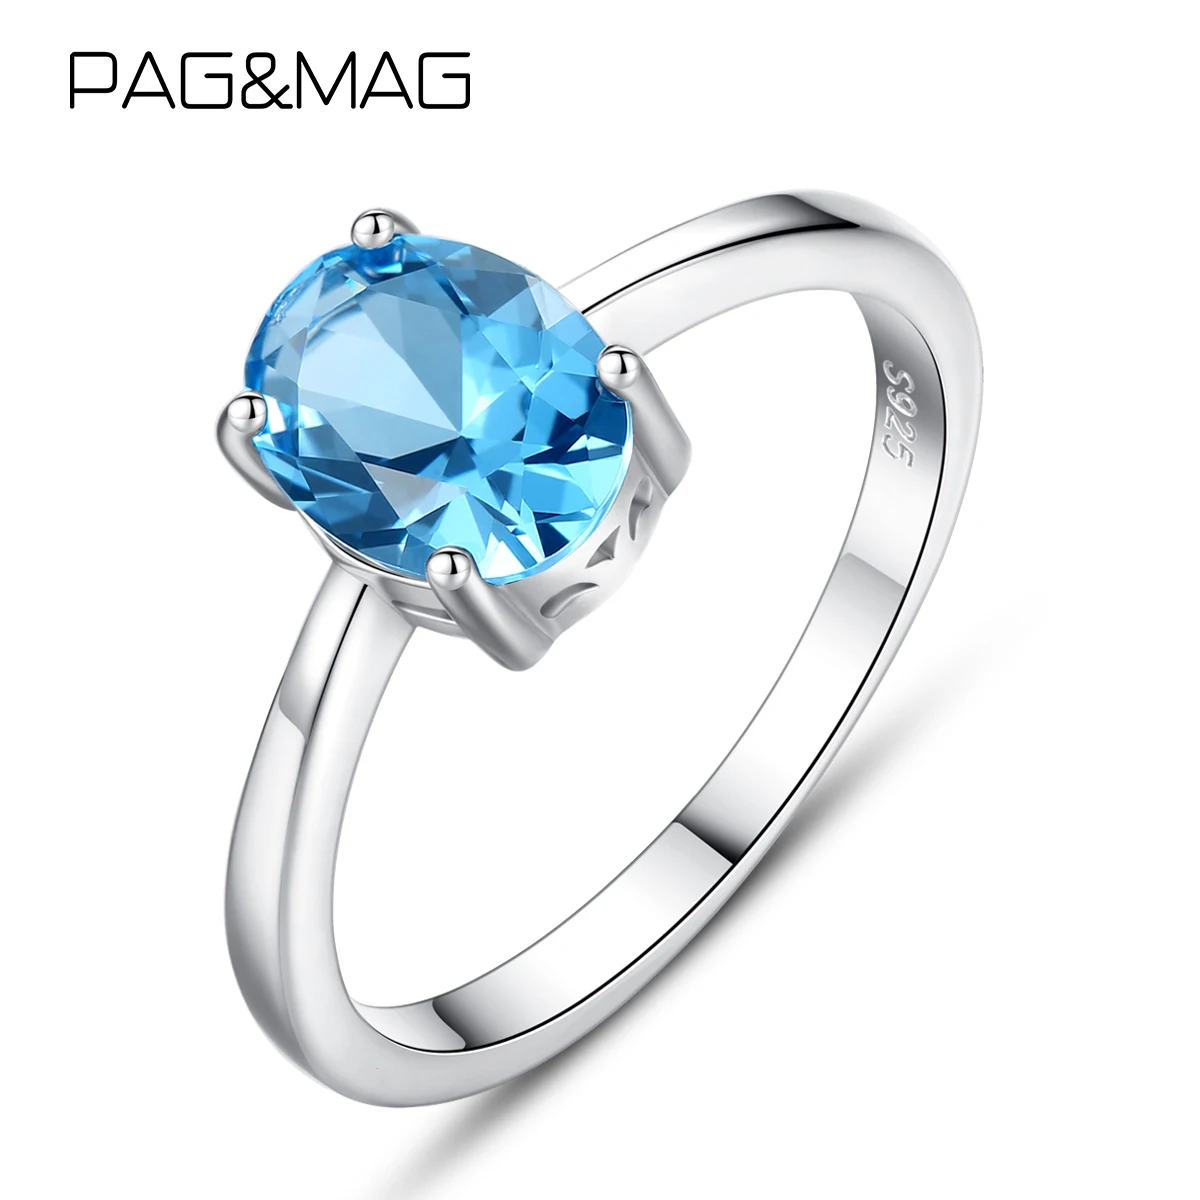 

PAG&MAG Korean Sapphire 925 Sterling Silver Ring For Women Sky Blue Gemstone Ring Wedding Band Fashion Jewelry anillos de Plata